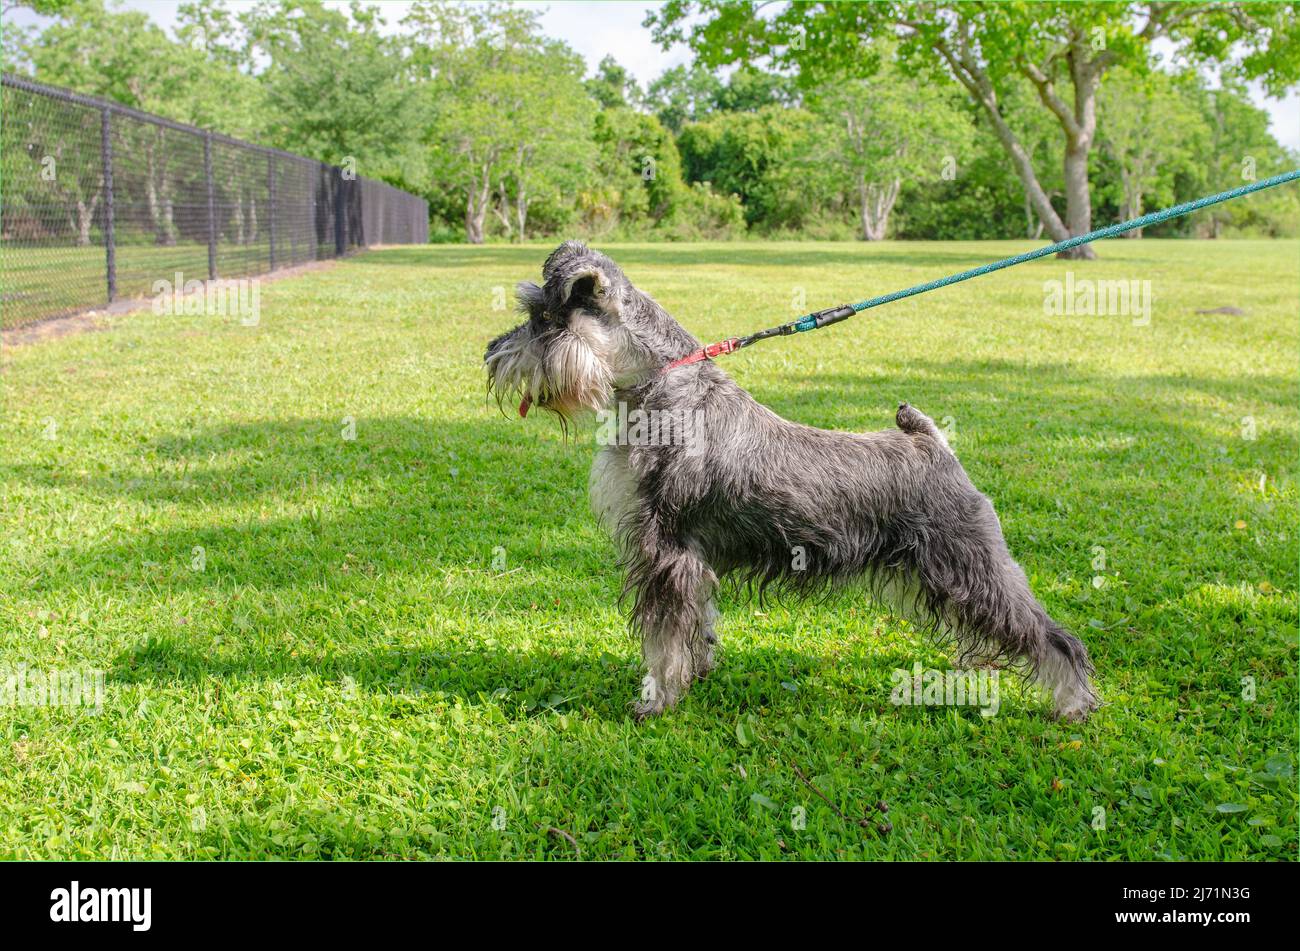 Schnauzer in Grass, Side View, Pulling Leash, Looking toward Fence, Open land and tree in background, sunny day with dappled shade Stock Photo